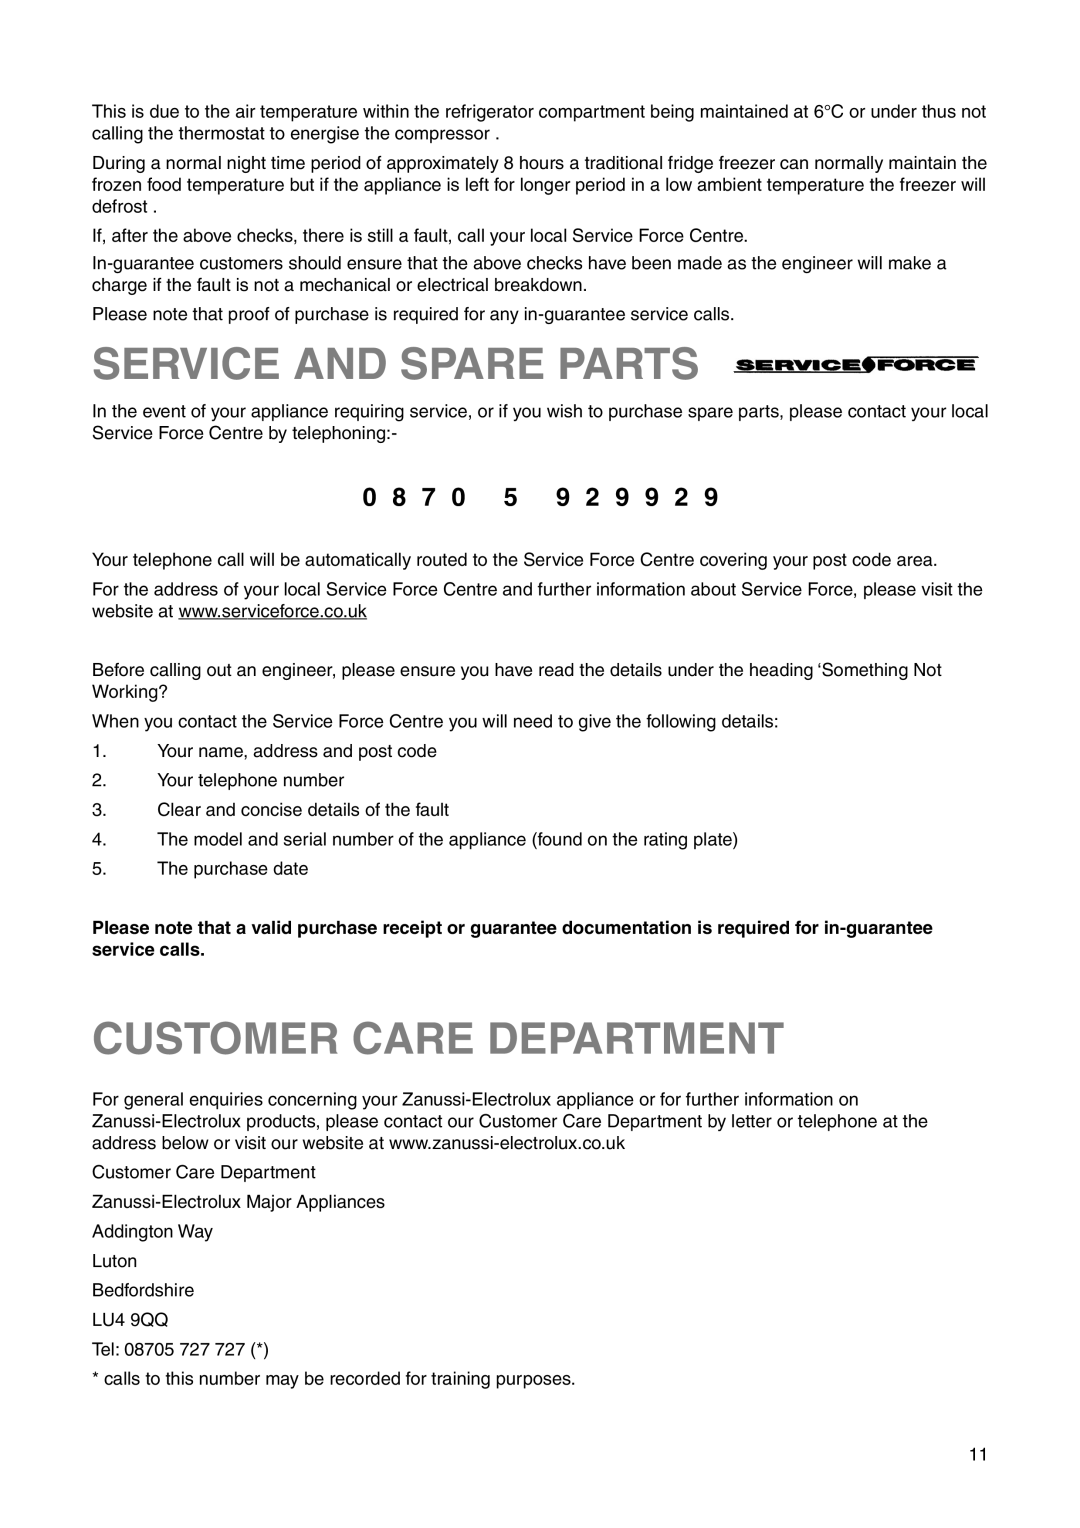 Zanussi ZRB 3225 X user manual Service And Spare Parts, Customer Care Department, 9 2 